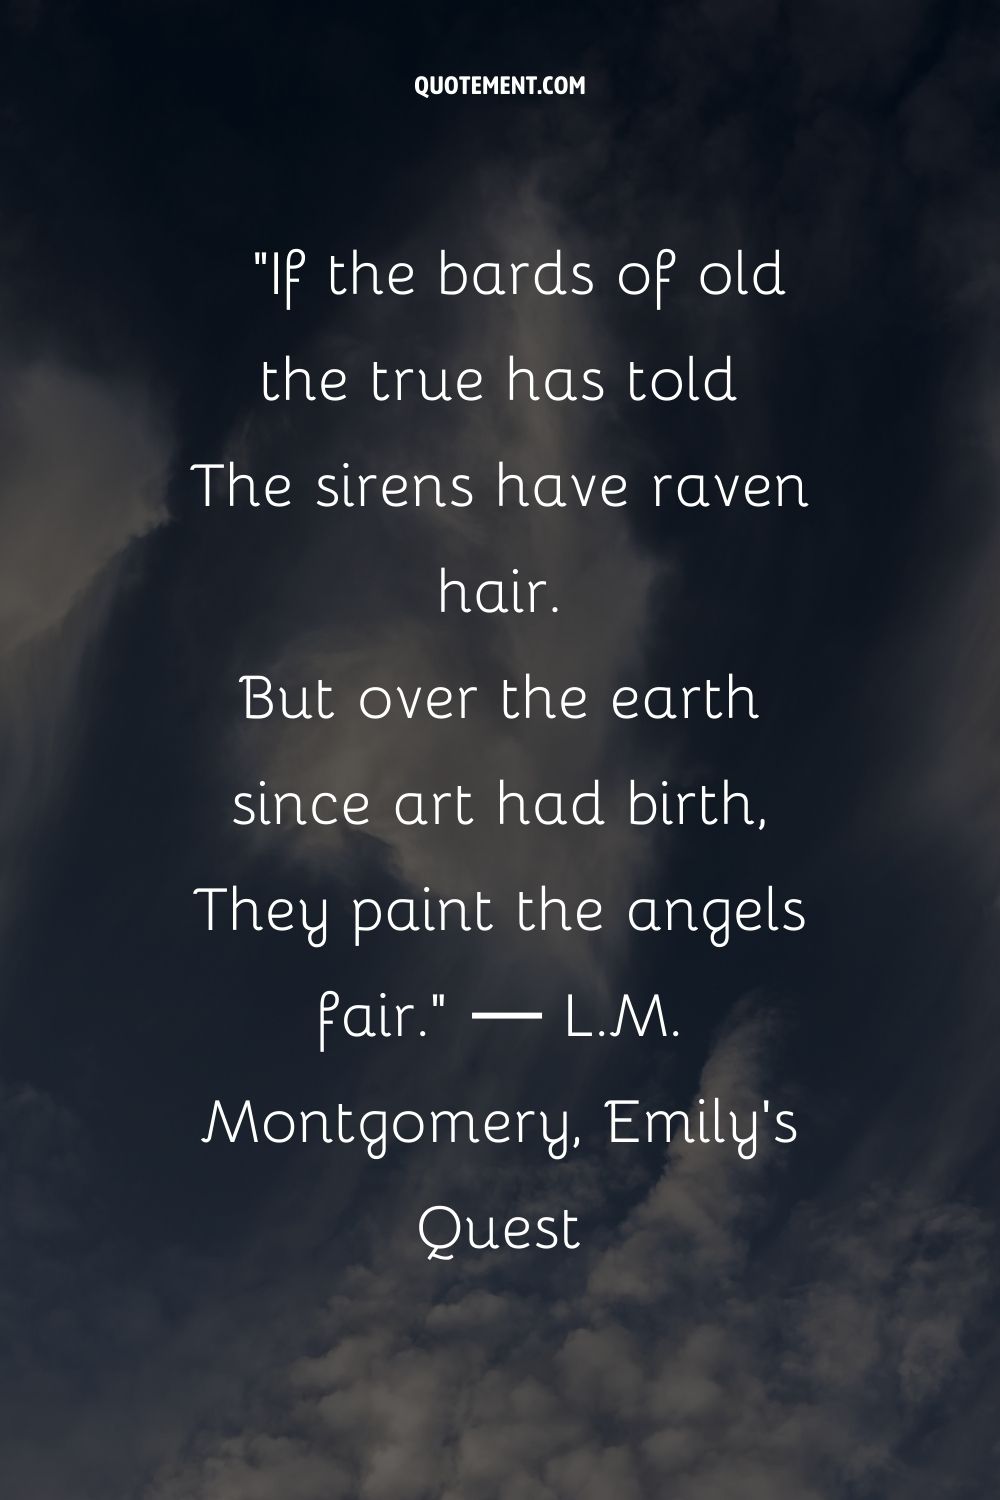 If the bards of old the true has told The sirens have raven hair.